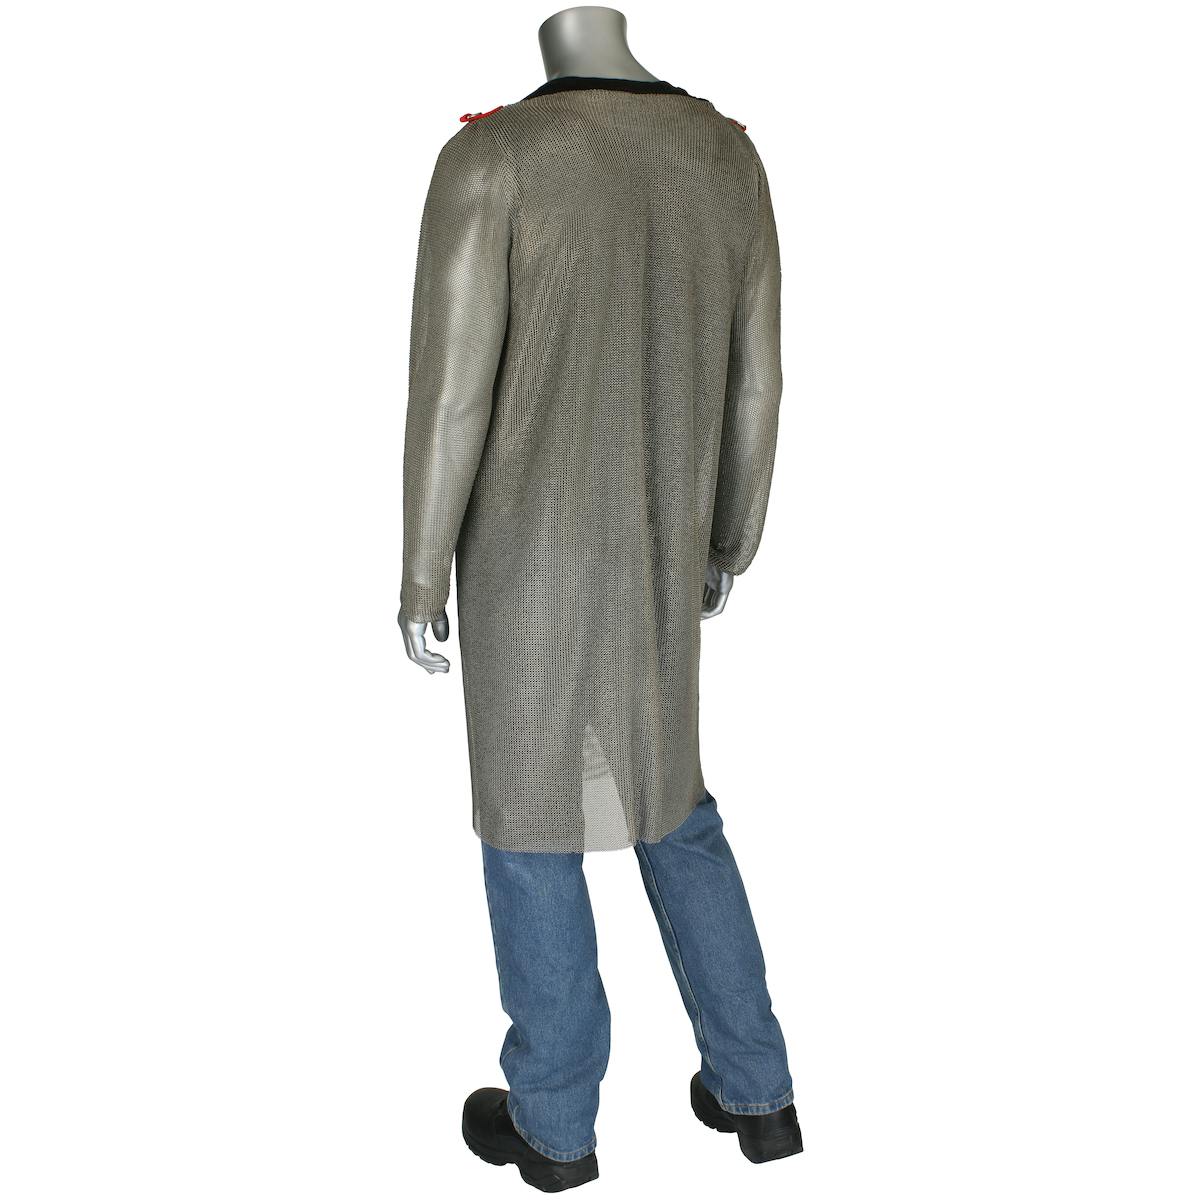 Titanium Wire Ring Mesh Full Body Tunic with Sleeves, Silver (USM-4301TI)_0